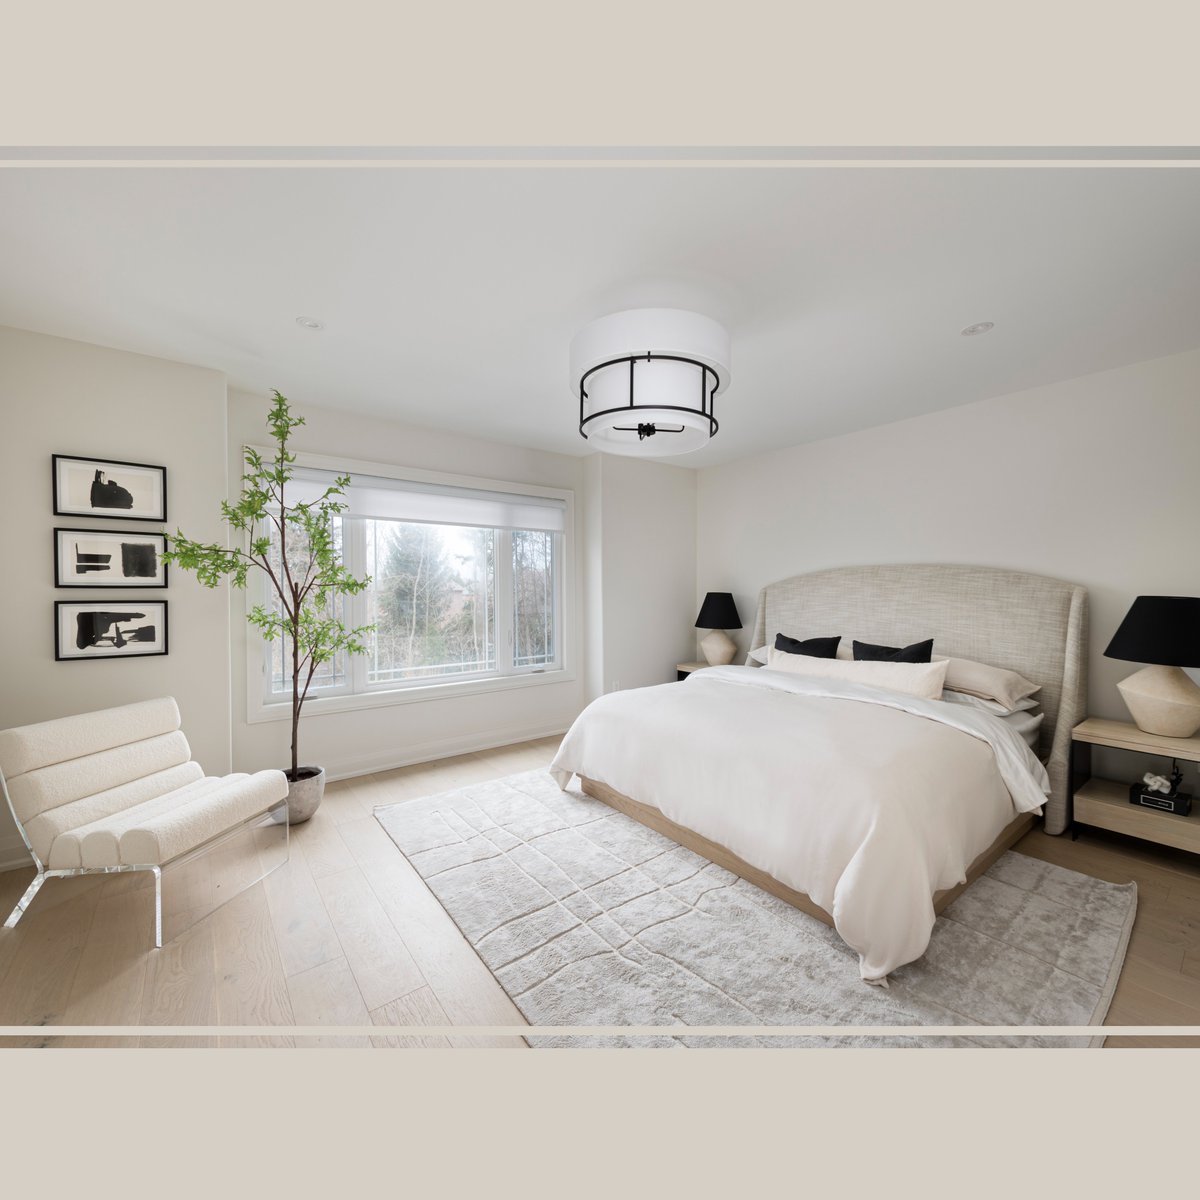 Rest easy in your new home at Kingswood Cobourg.
Stunning home designs that fit your family's lifestyle, like this gorgeous bedroom in the Donegan model.

Learn more about our quality homes at kingswoodcobourg.ca

#newhomes #cobourg #kingswoodcobourg